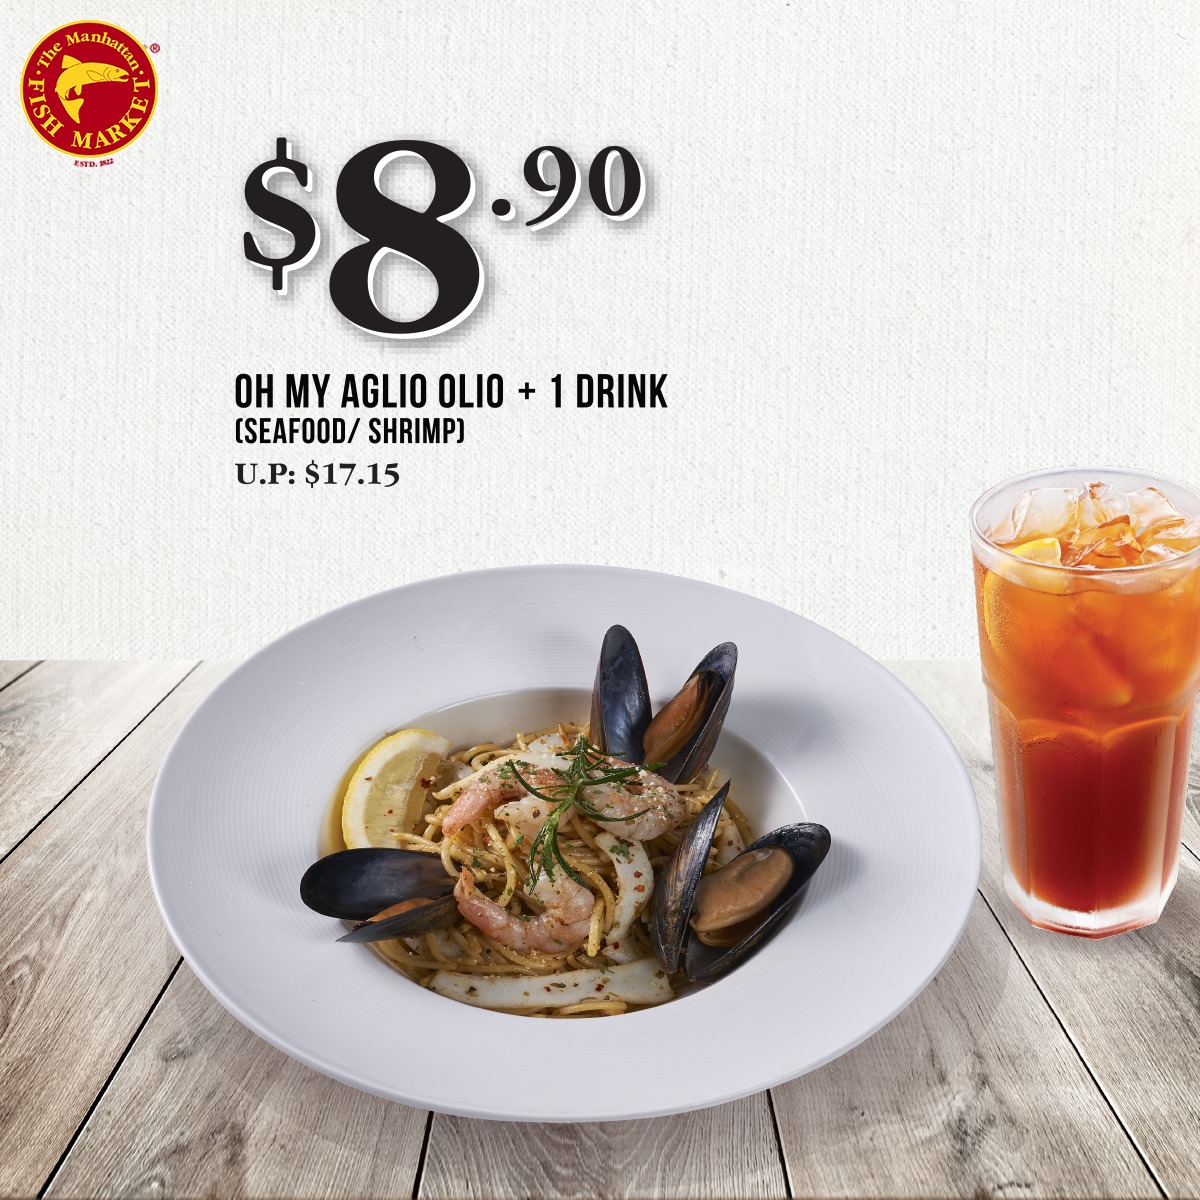 Flash these coupons from The Manhattan FISH MARKET on your mobile devices to enjoy great savings - 2